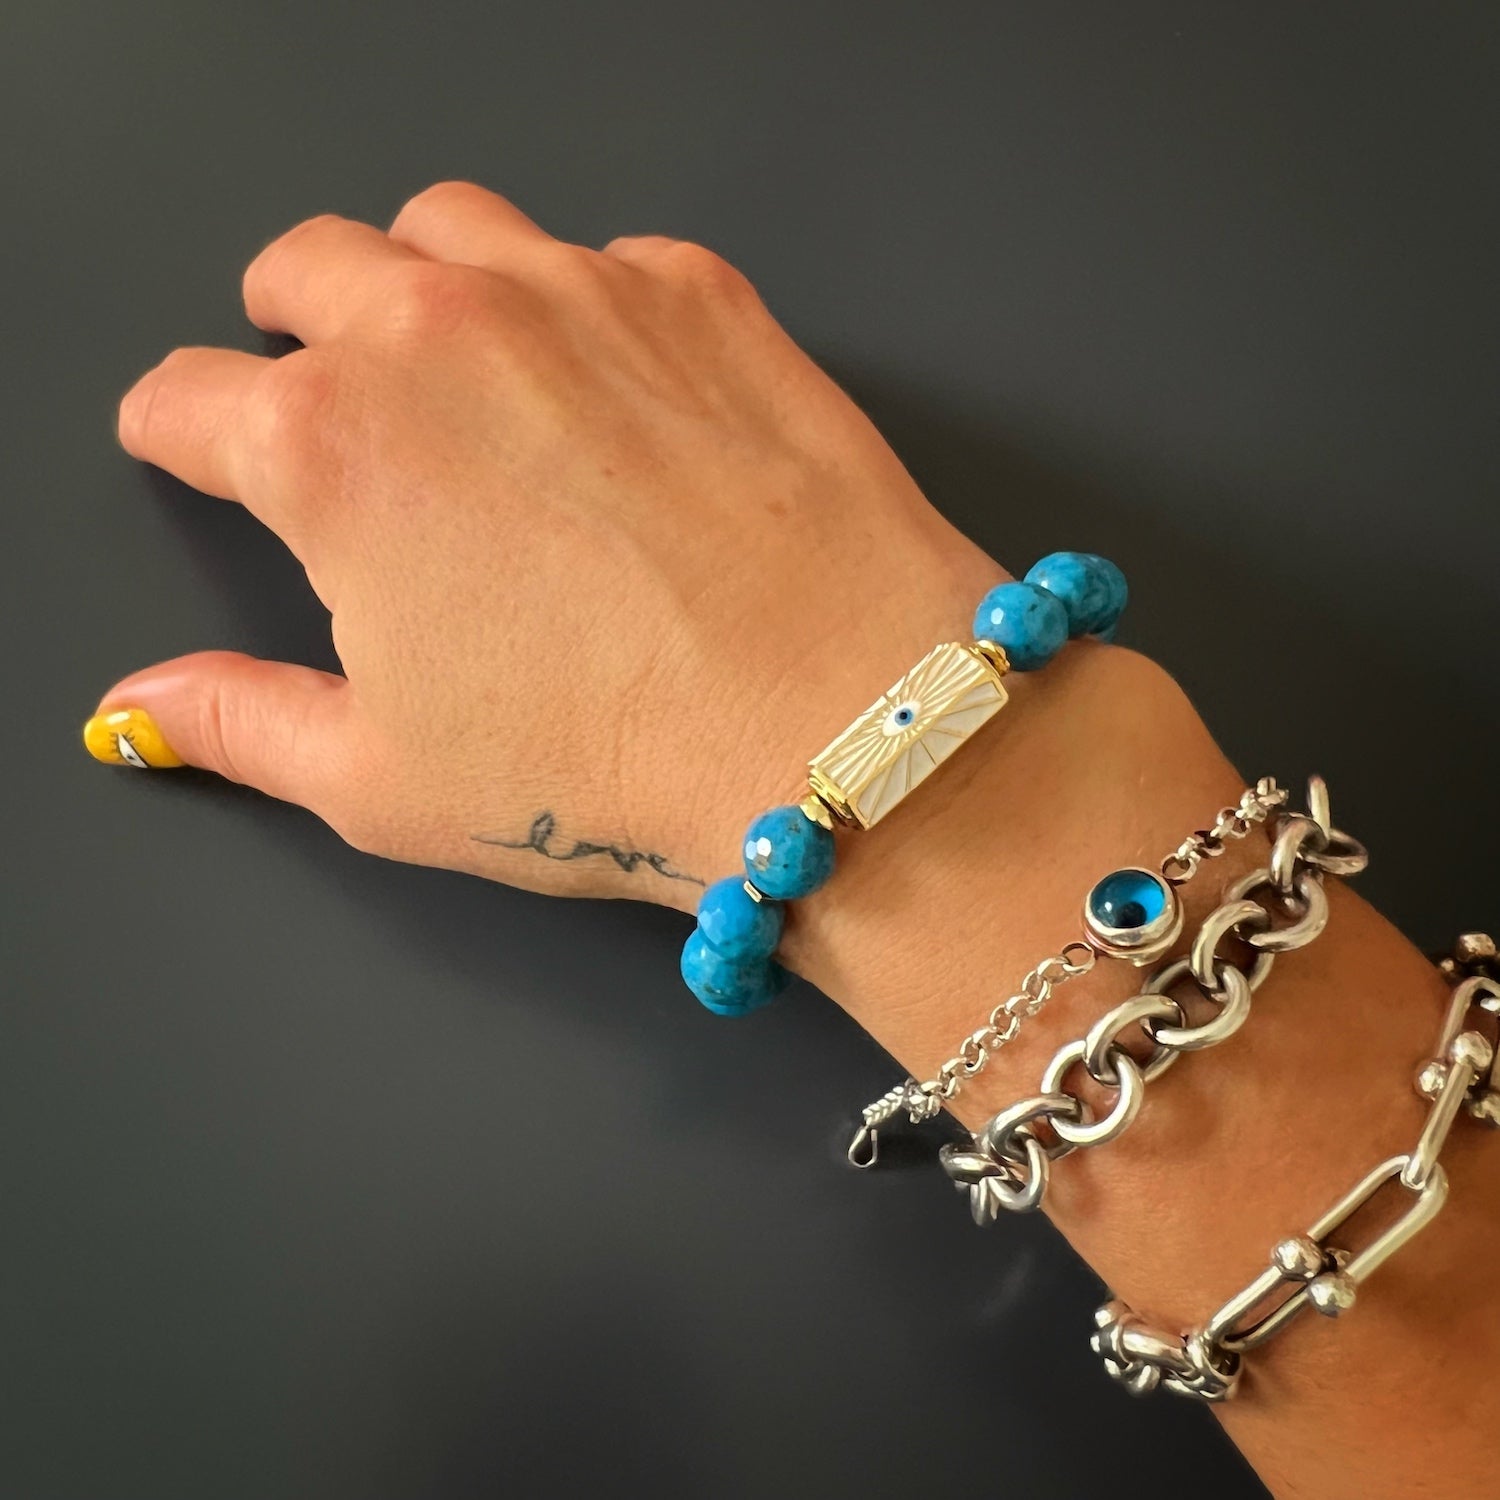 See how the Turquoise Luck and Protection Bracelet adorns the hand model&#39;s wrist, adding a touch of spirituality and enhancing her style.